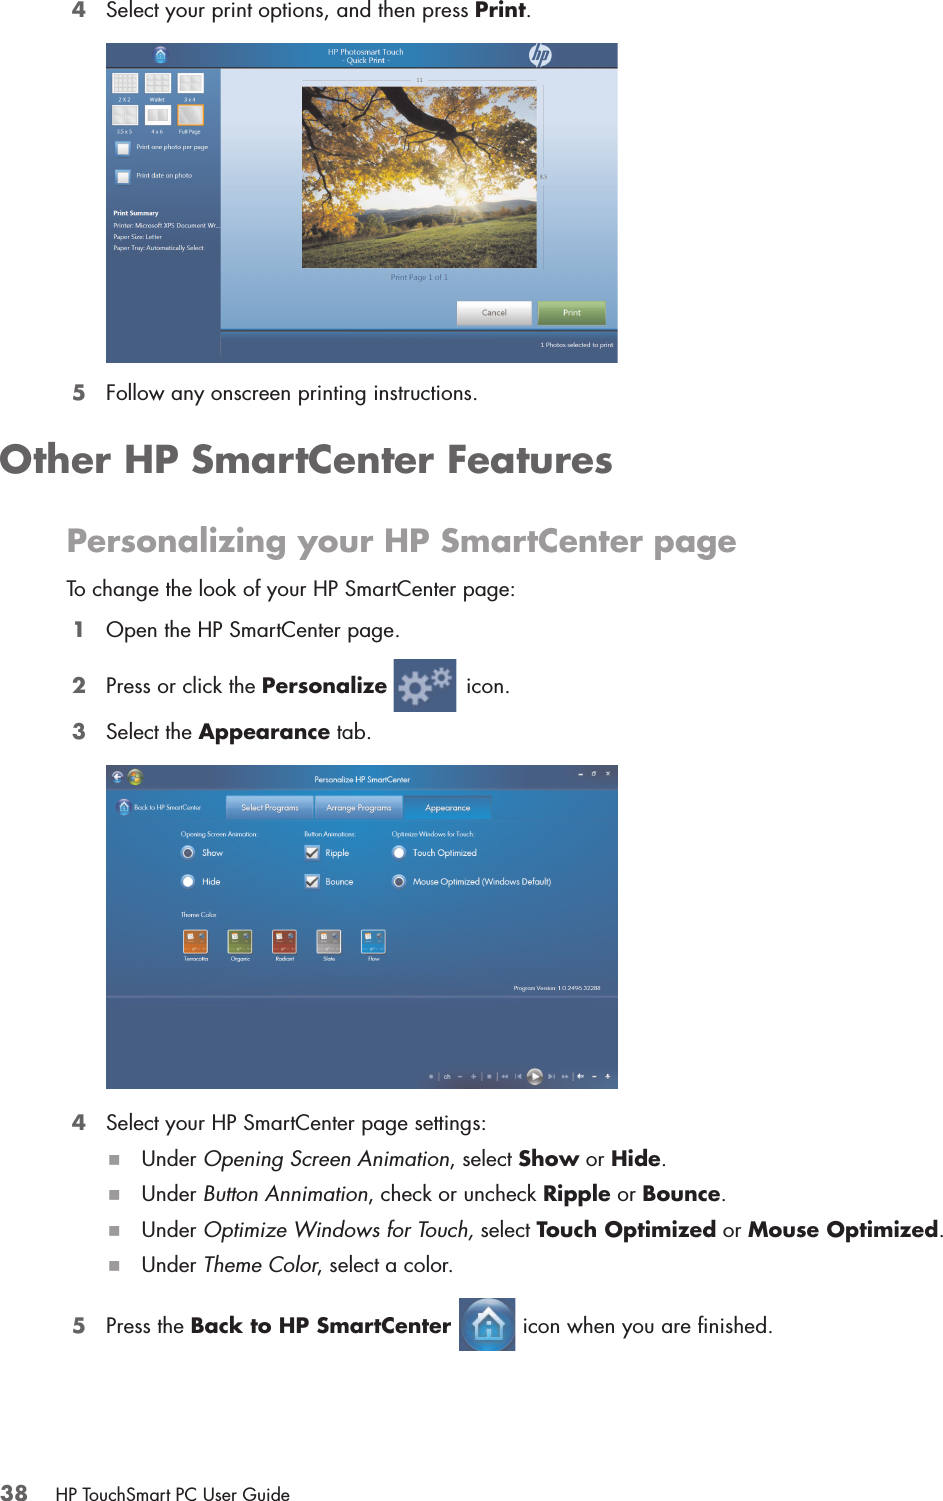 38 HP TouchSmart PC User Guide4Select your print options, and then press Print.5Follow any onscreen printing instructions.Other HP SmartCenter FeaturesPersonalizing your HP SmartCenter pageTo change the look of your HP SmartCenter page:1Open the HP SmartCenter page.2Press or click the Personalize  icon. 3Select the Appearance tab.4Select your HP SmartCenter page settings:Under Opening Screen Animation, select Show or Hide. Under Button Annimation, check or uncheck Ripple or Bounce. Under Optimize Windows for Touch, select Touch Optimized or Mouse Optimized.Under Theme Color, select a color.5Press the Back to HP SmartCenter   icon when you are finished.